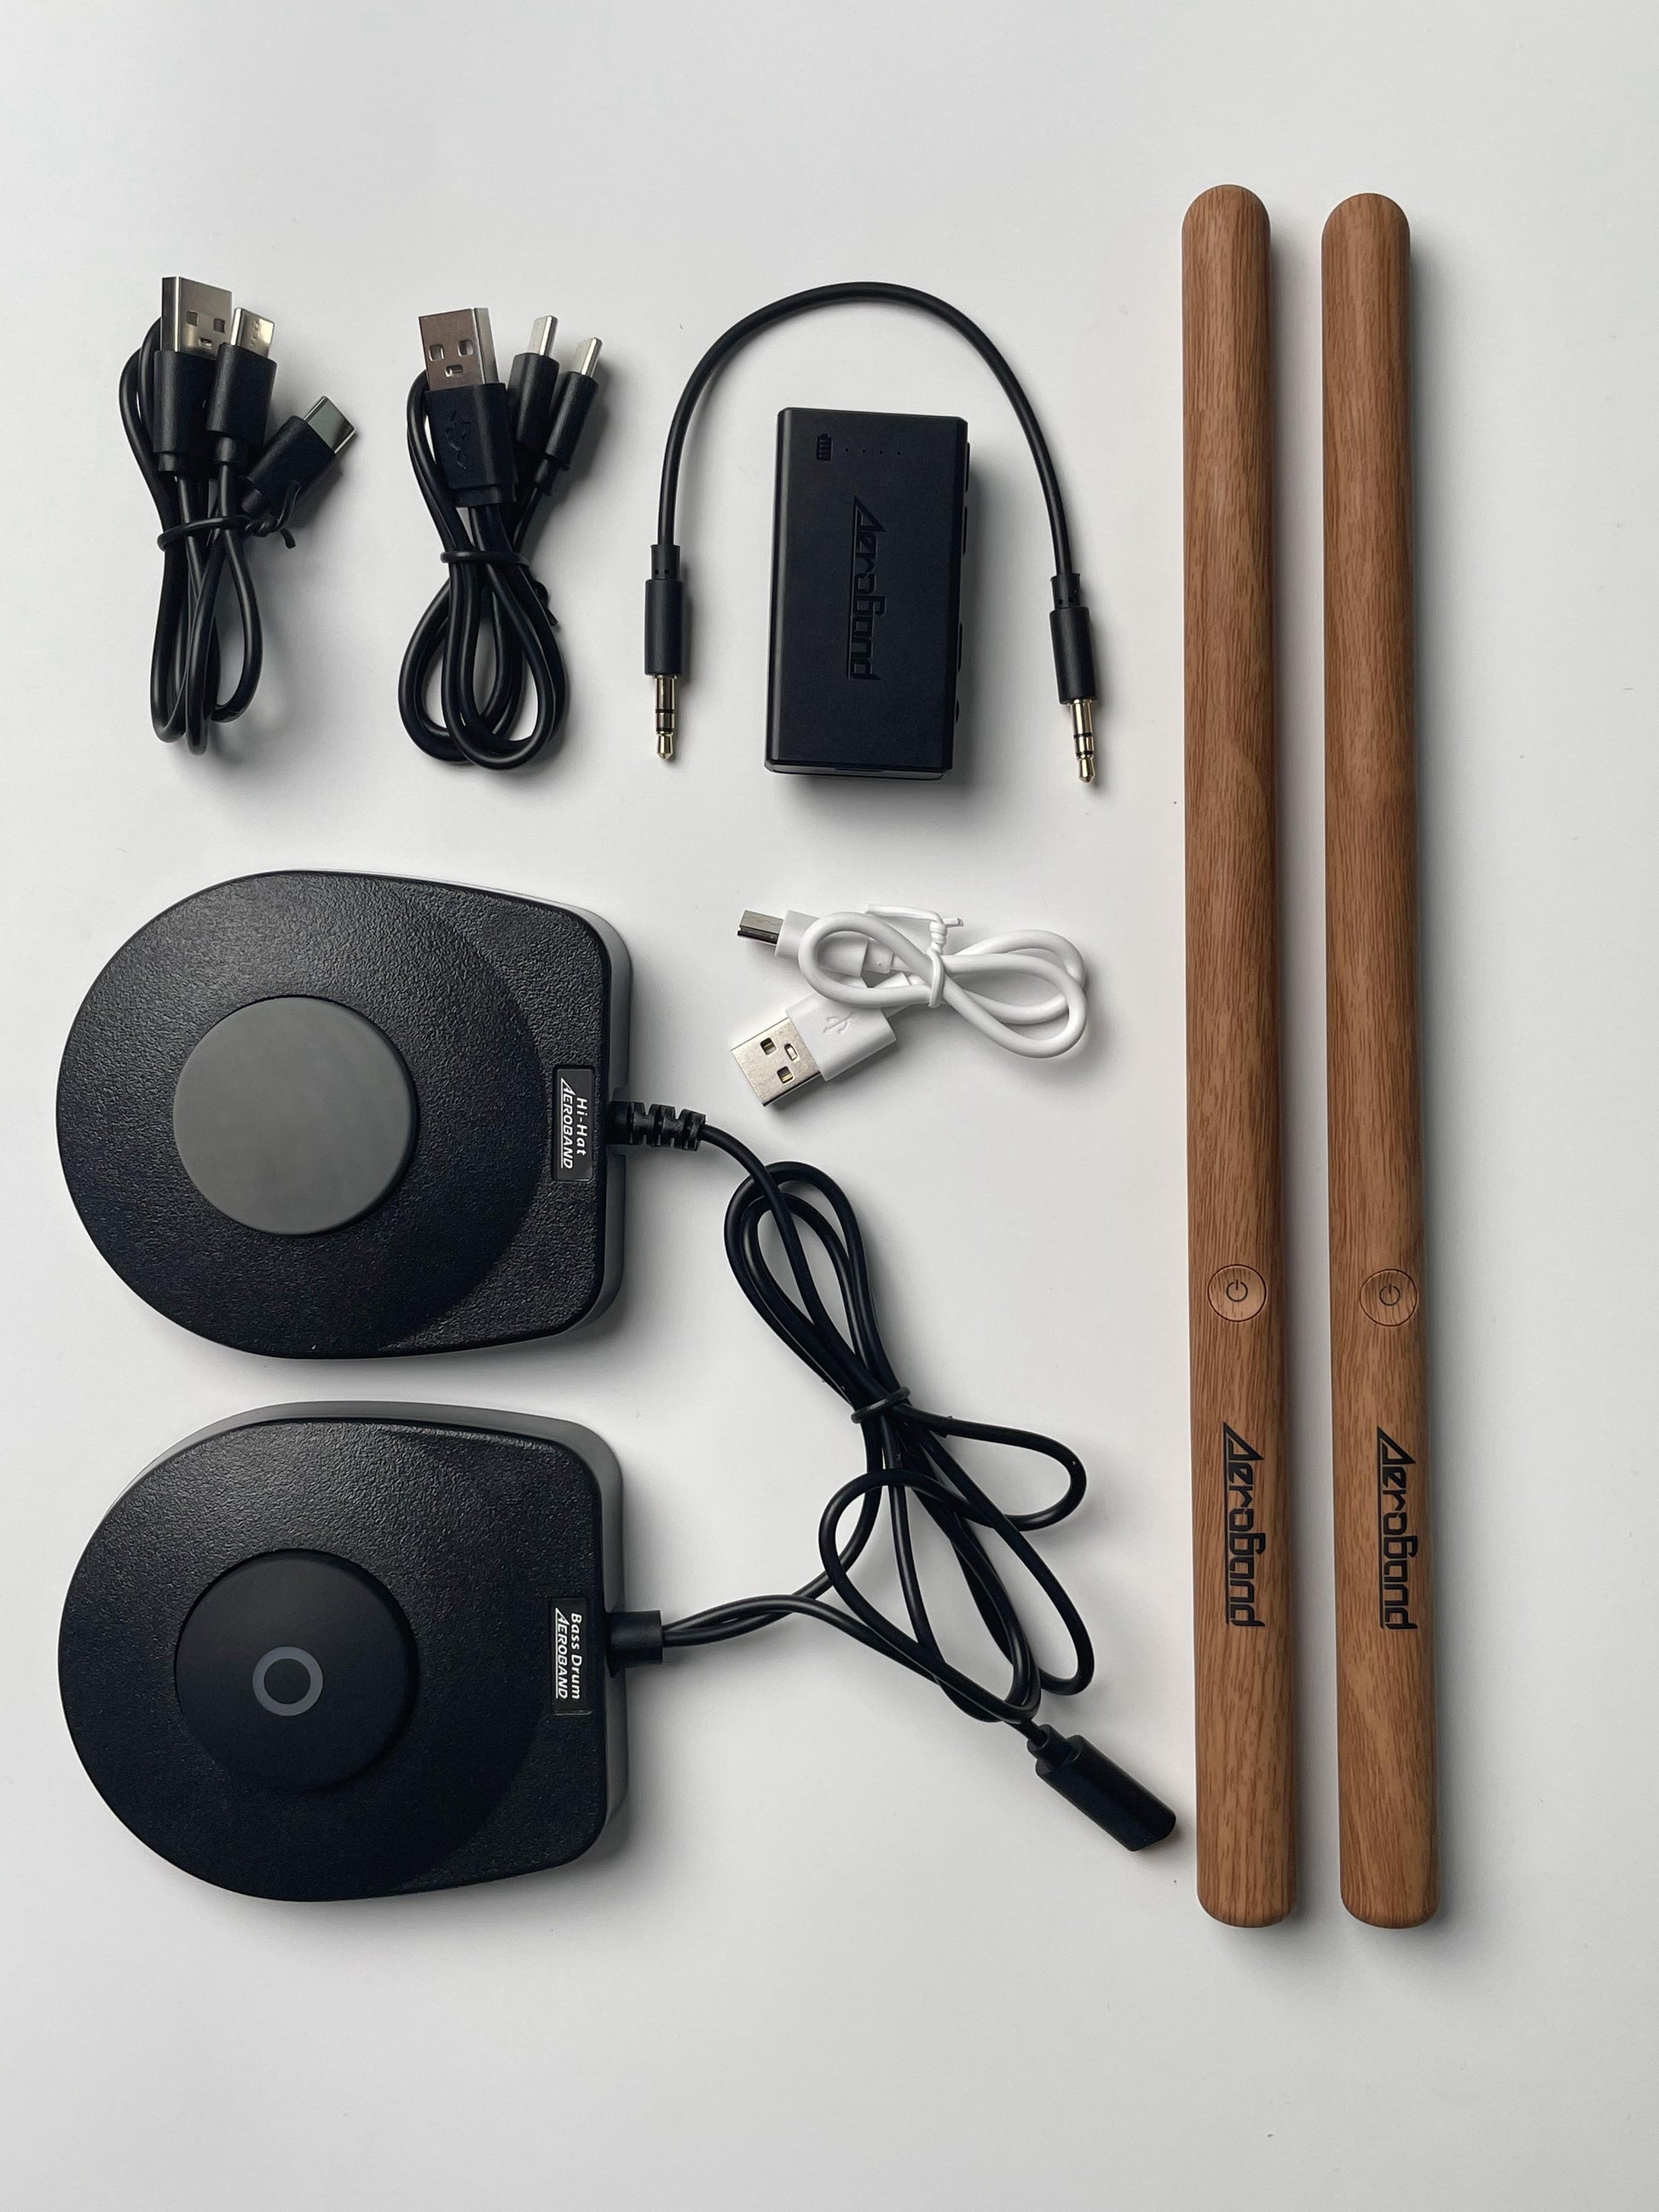 Check Out Aeroband PocketDrum 2 Plus: Electronic Drum Set – AGTC